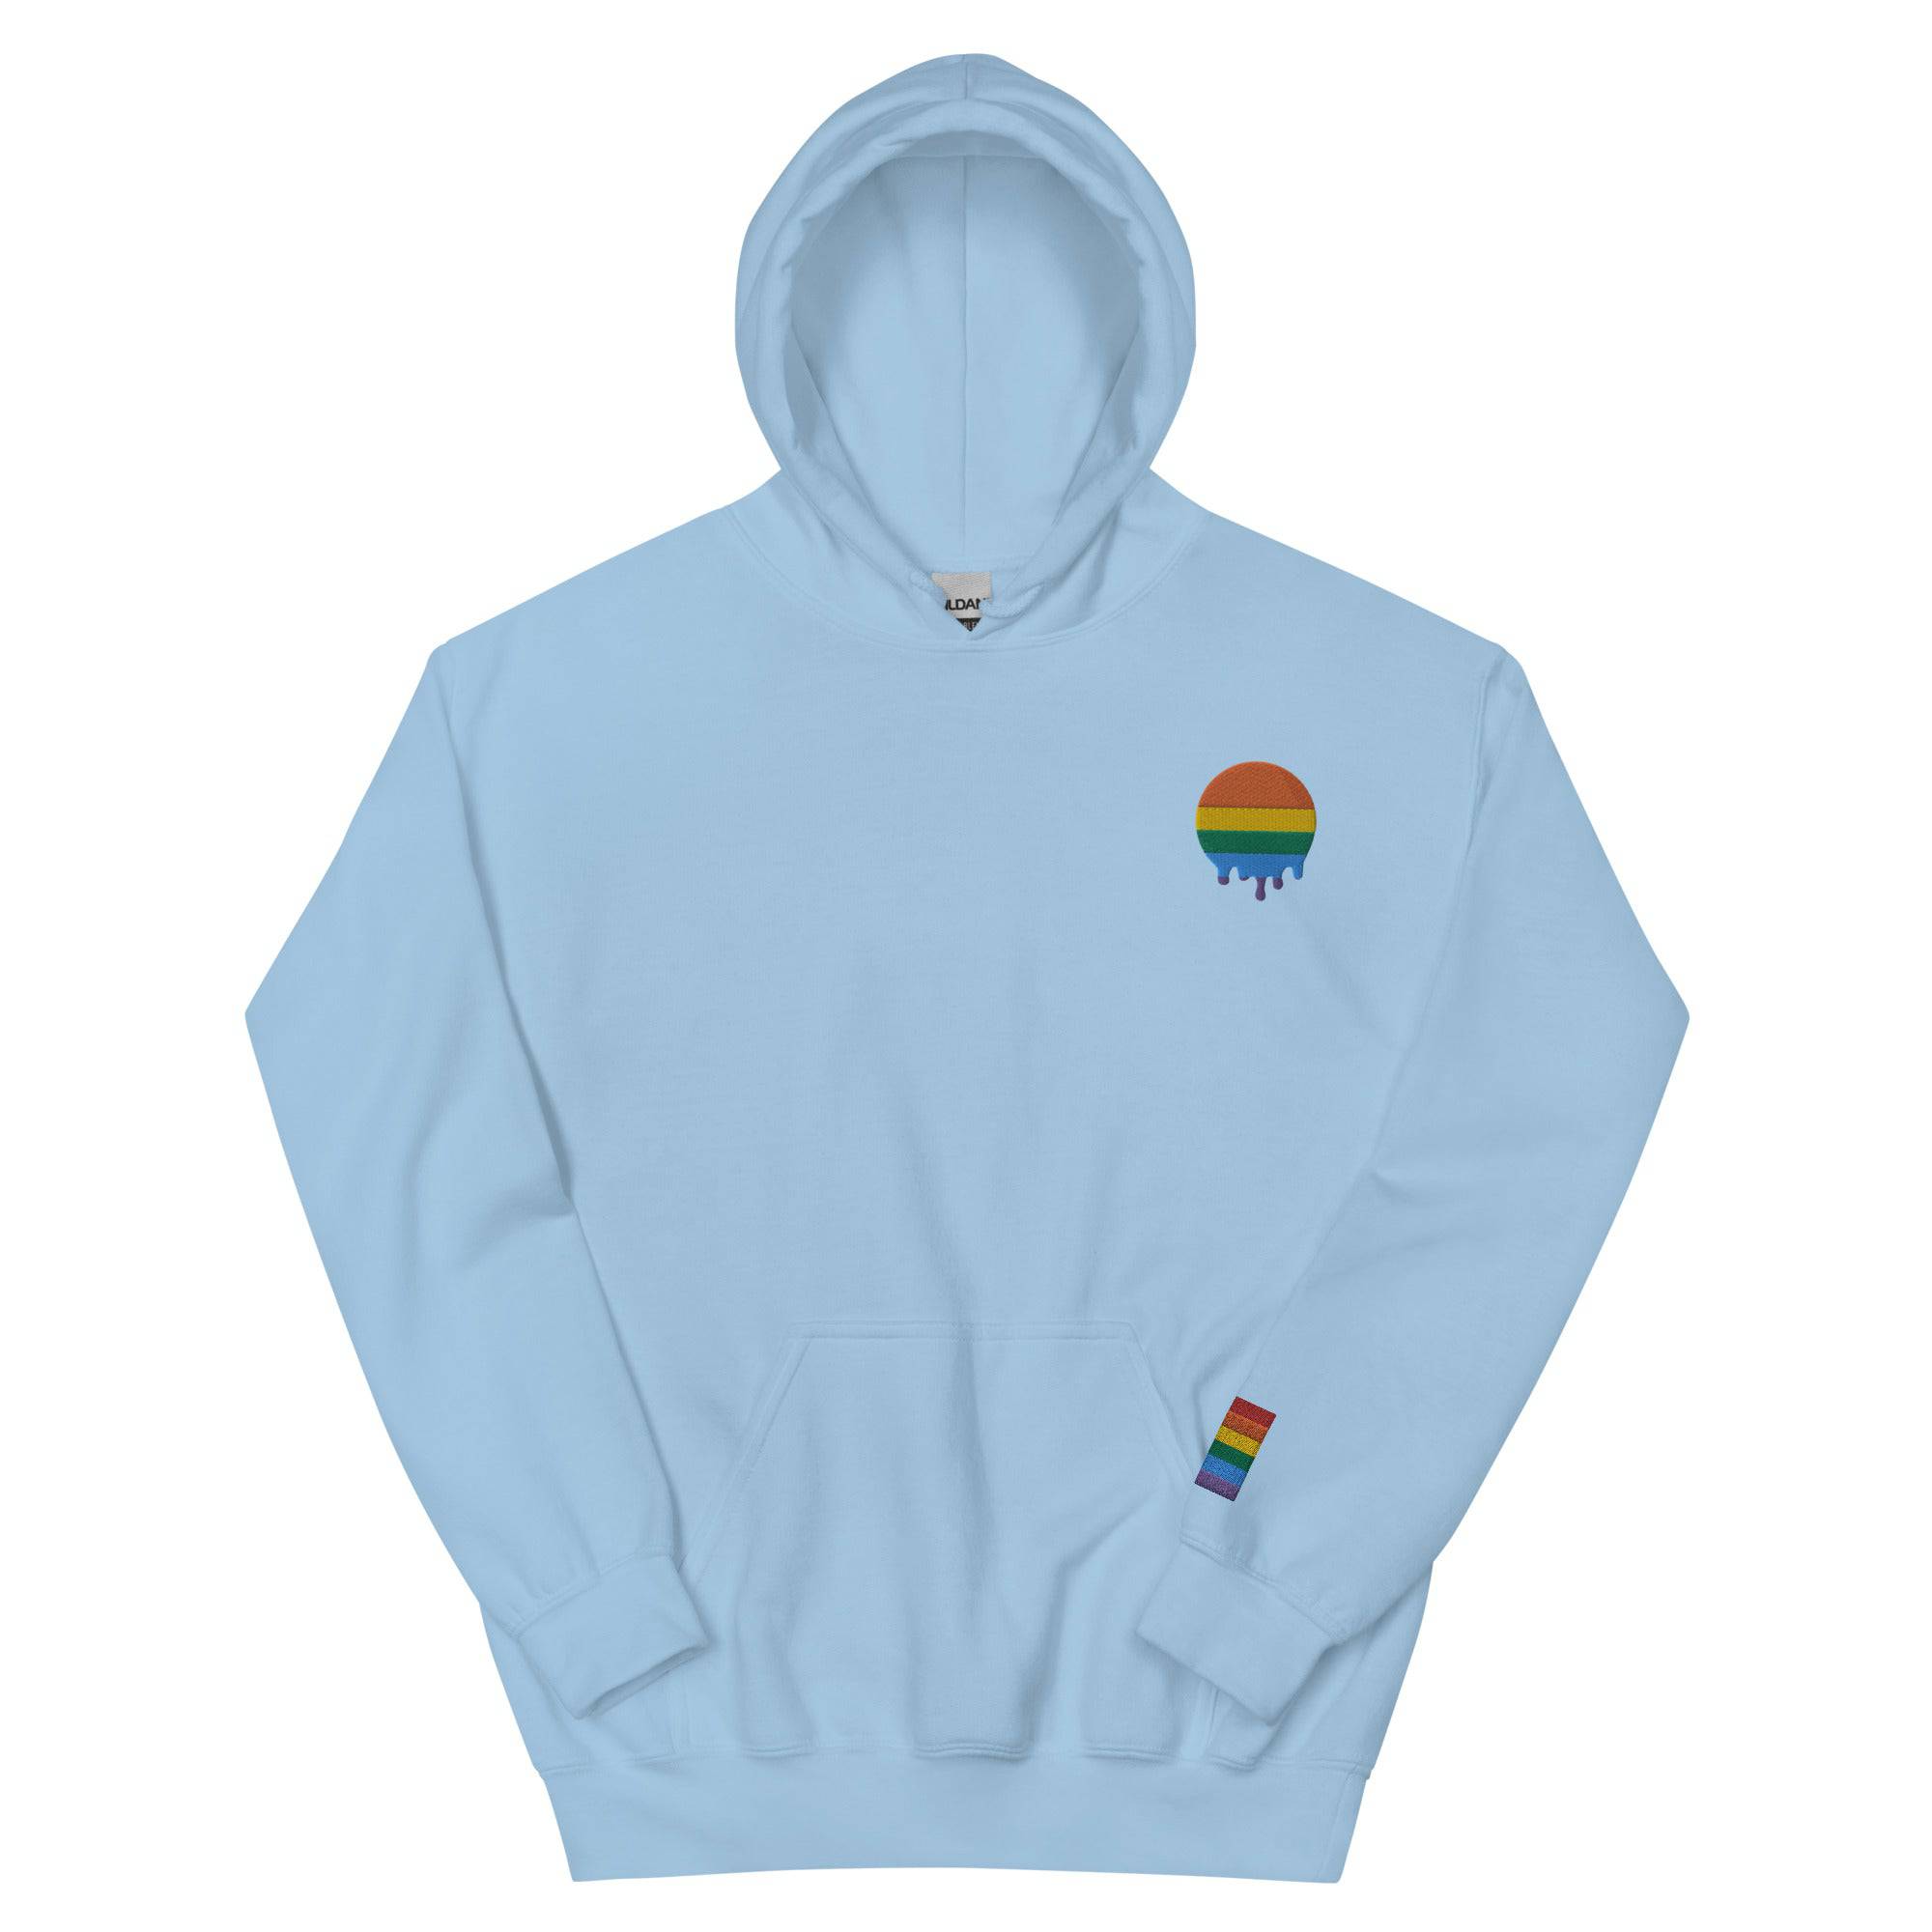 Premium Melting Rainbow Pride Embroidered Hoodie - Rose Gold Co. Shop